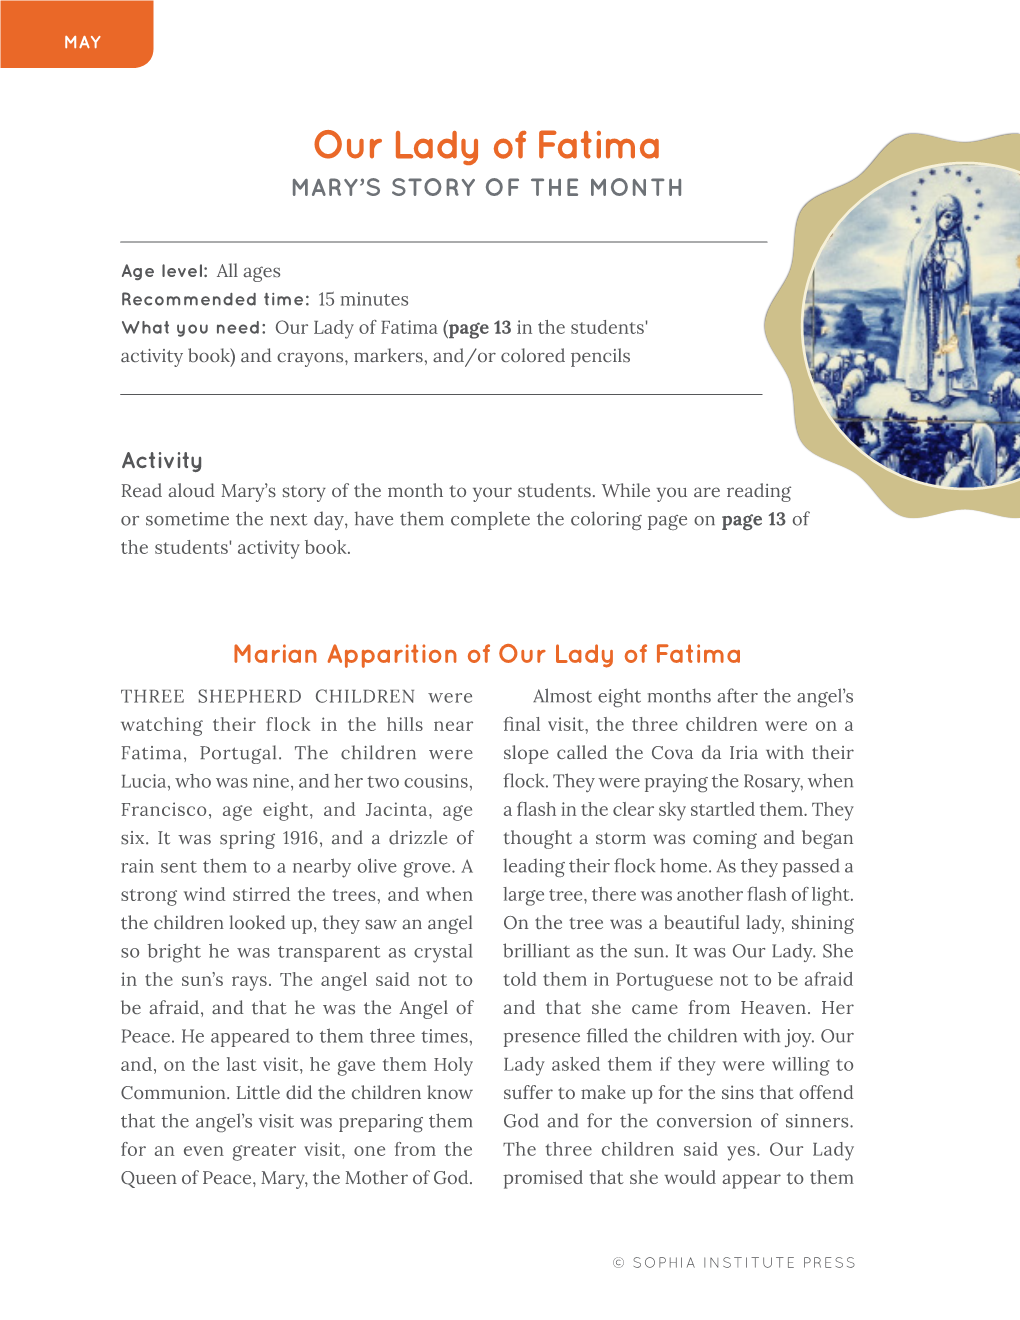 Our Lady of Fatima MARY’S STORY of the MONTH